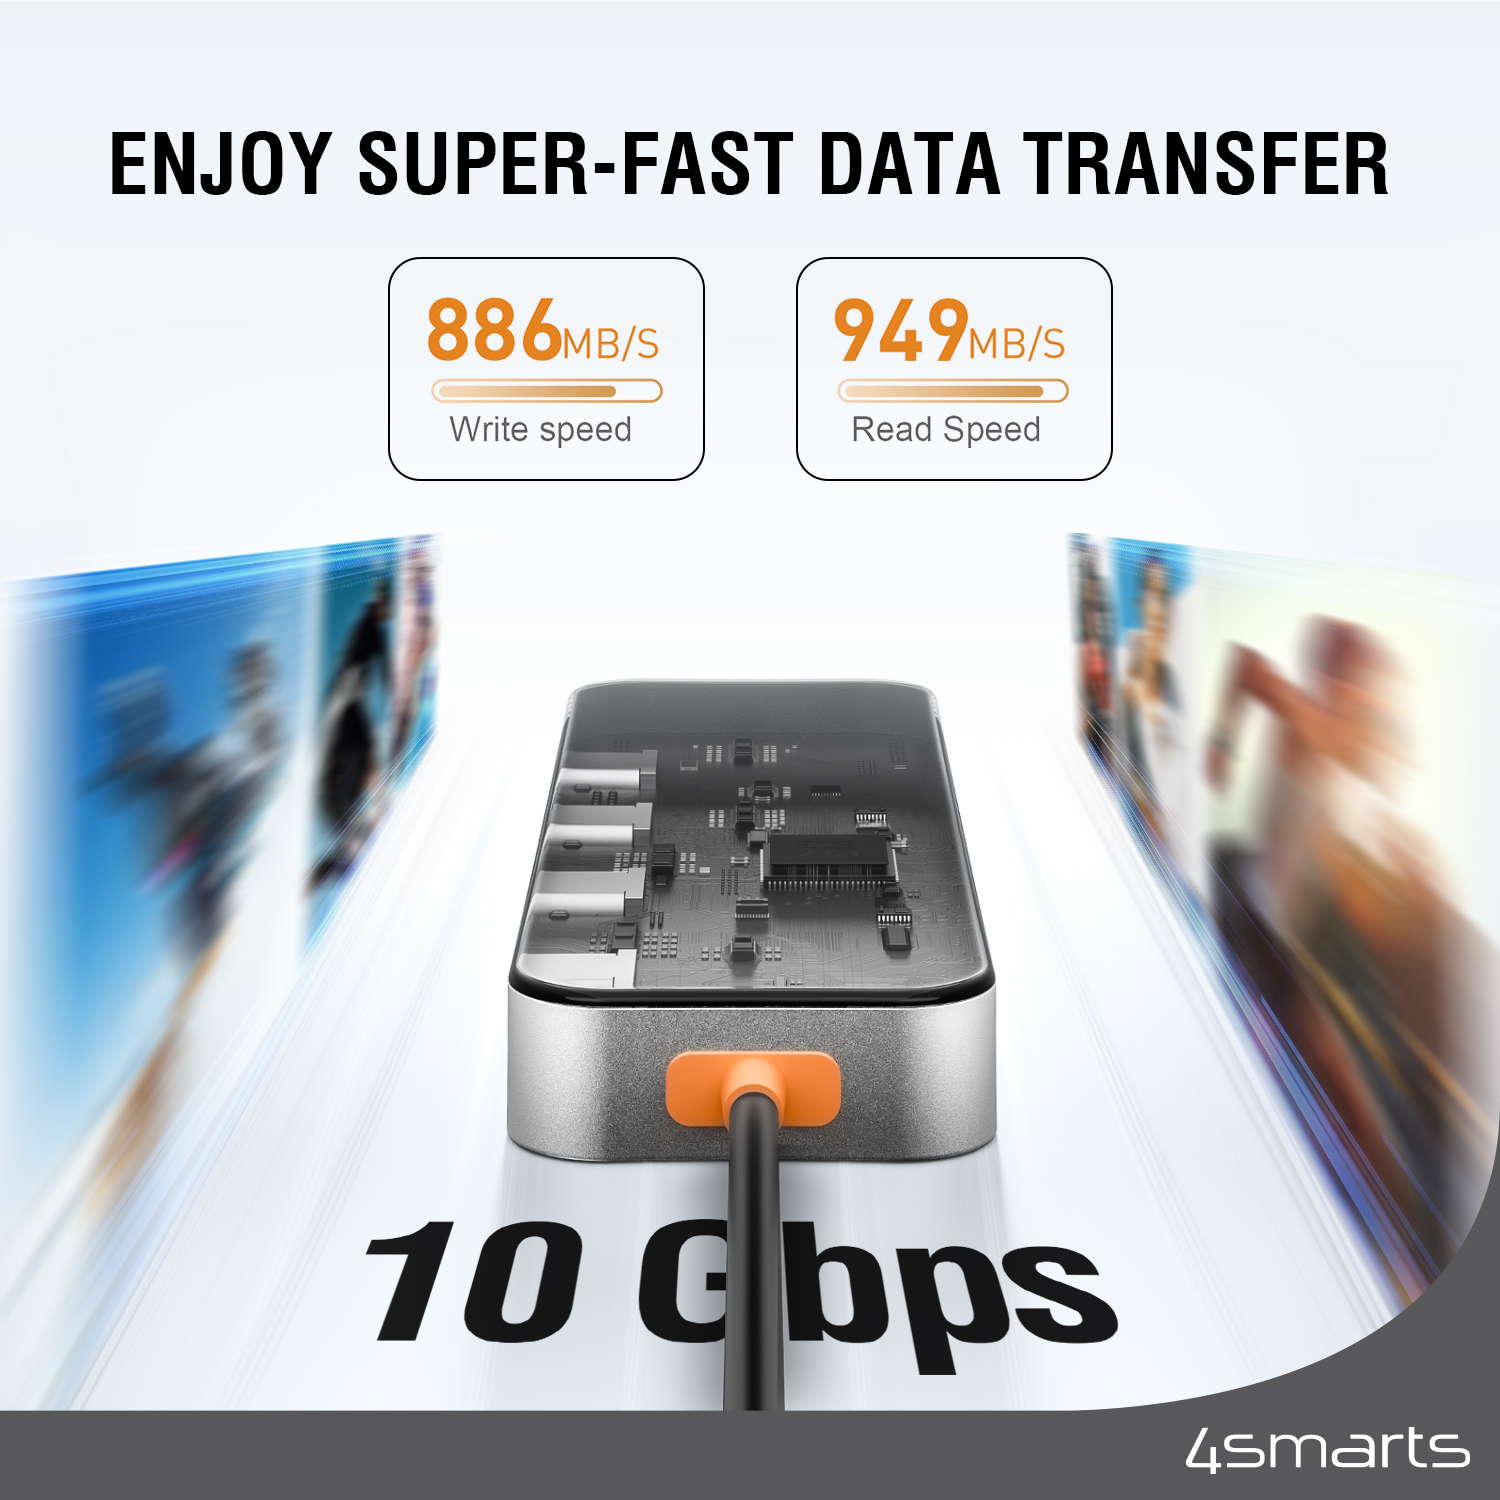 Experience extra-fast data transfer with 4smarts USB hubs.